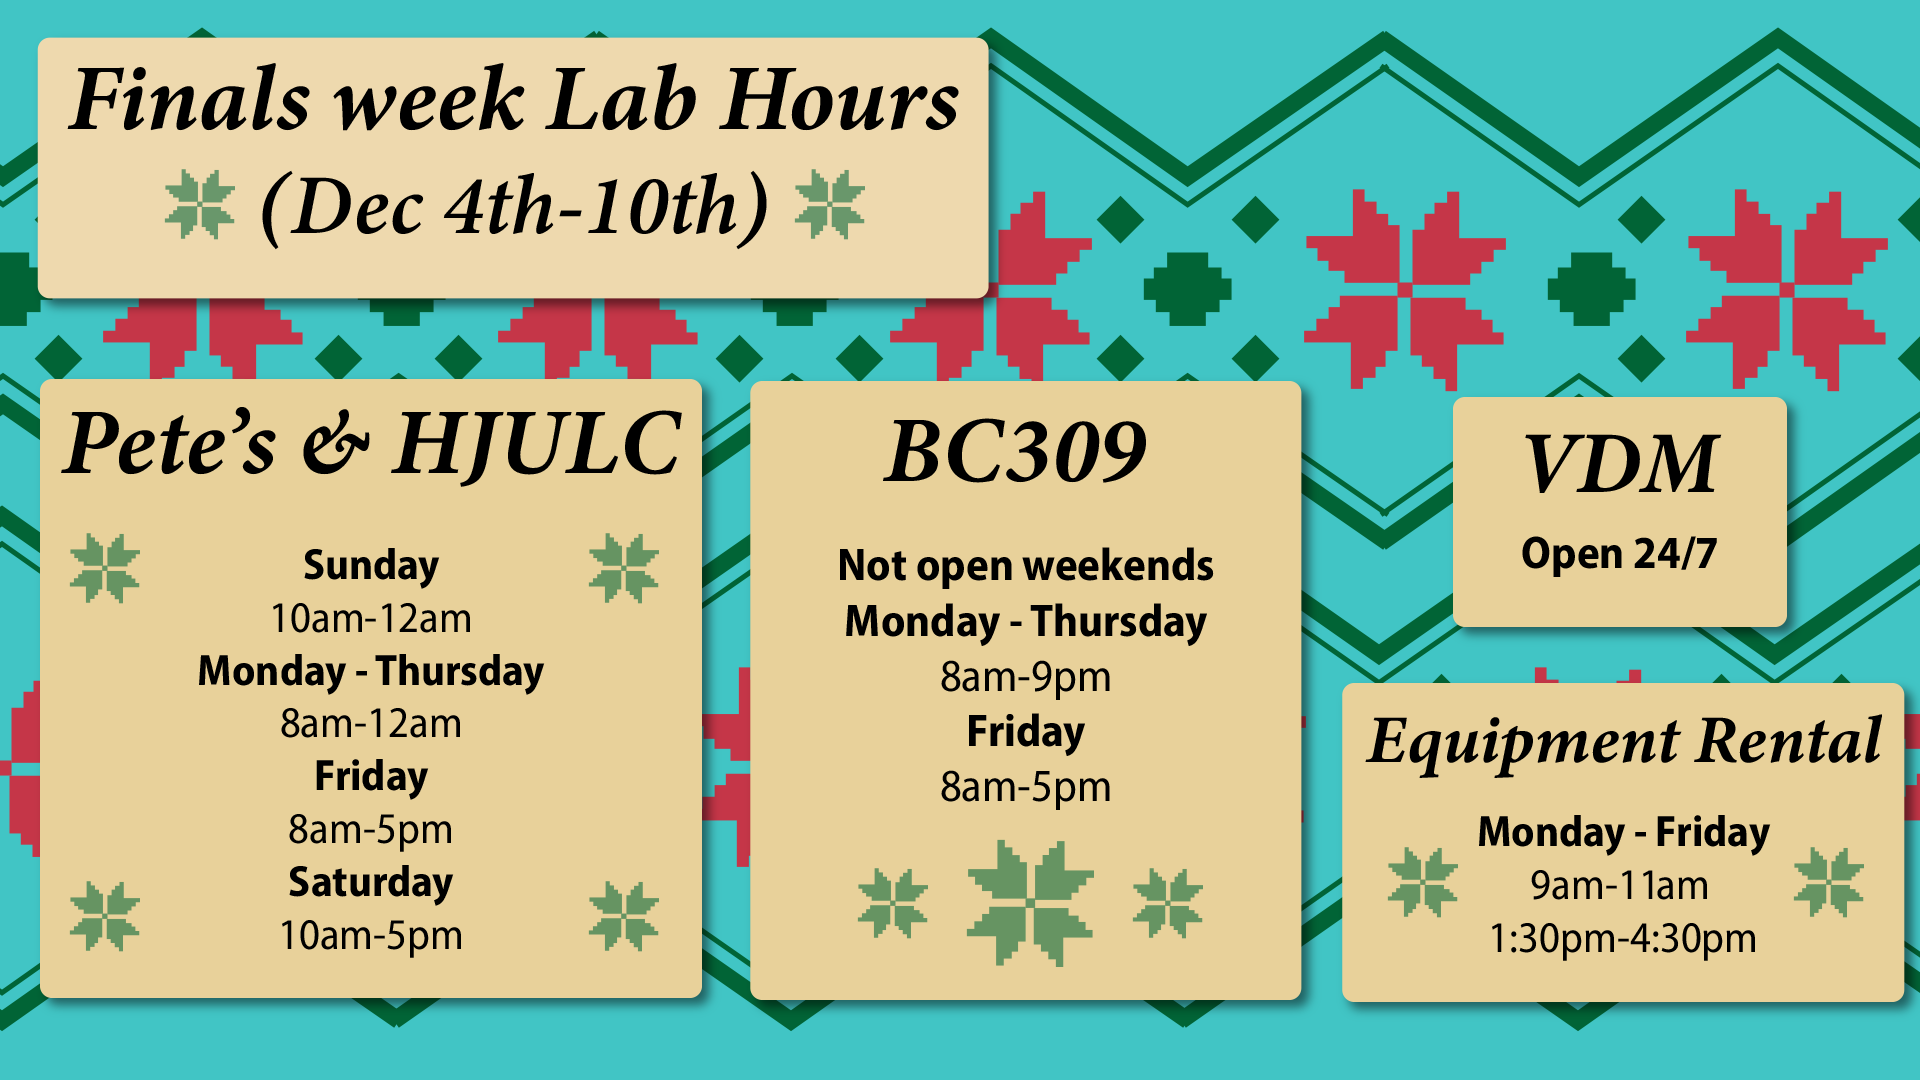 For finals week lab hours (Dec 4th - 10th), visit studenttech.nmsu.edu/labs.